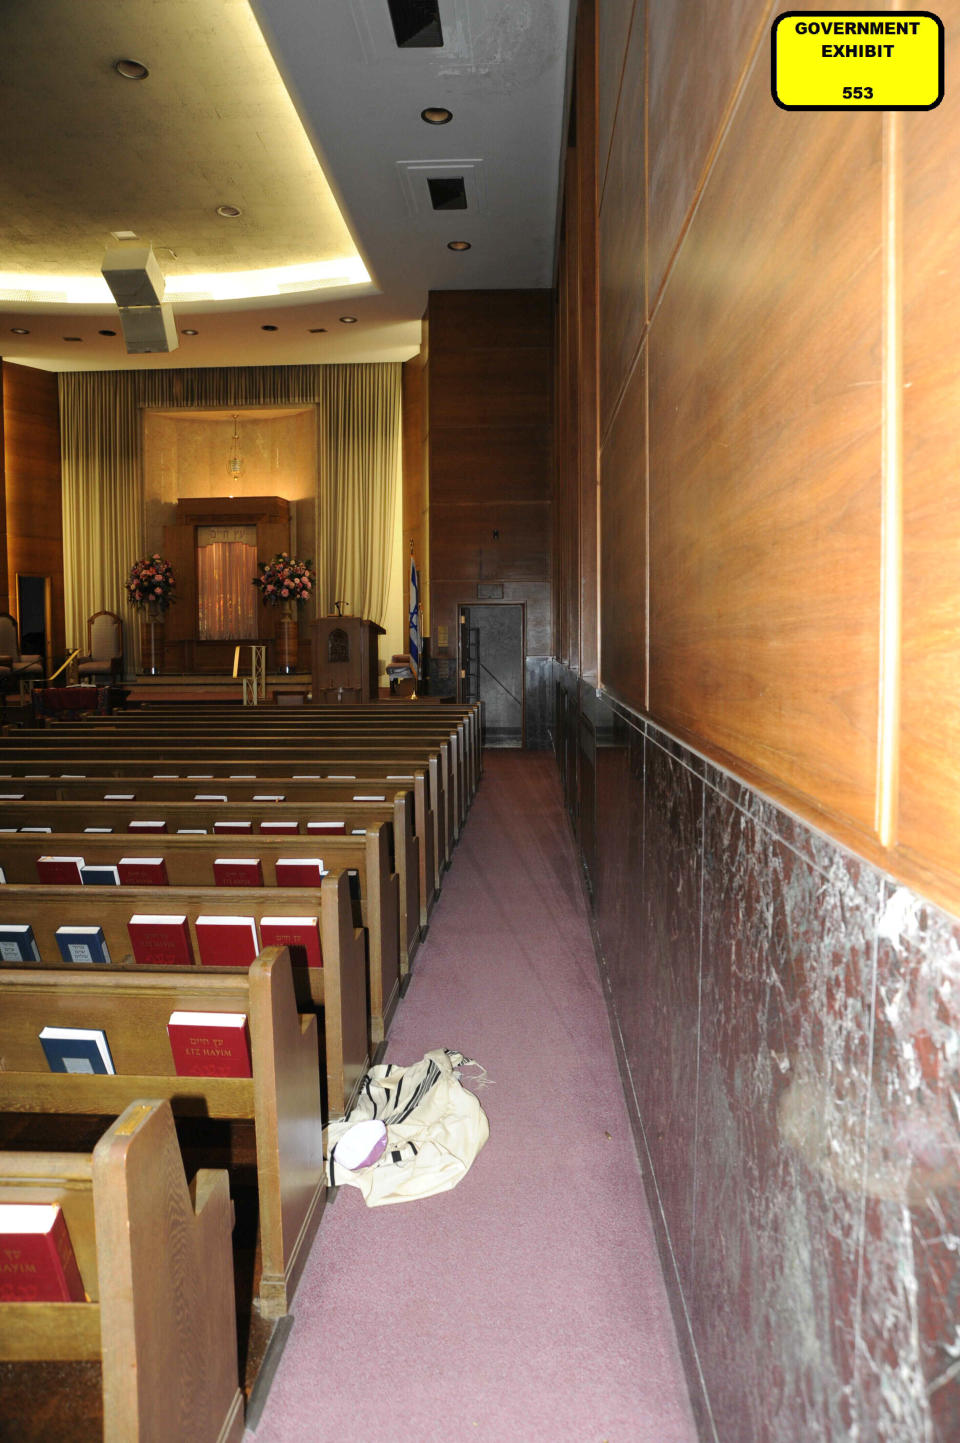 This photo of the Pervin Chapel in the Tree of Life synagogue building in Pittsburgh was entered May 31, 2023, as a court exhibit by prosecutors in the federal trial of Robert Bowers. He faces multiple charges in the killing of 11 worshippers from three congregations and the wounding of seven worshippers and police officers in the building on Oct. 27, 2018. The photo shows a fallen prayer shawl from one of the worshippers who fled the chapel, where Tree of Life Congregation members had been worshipping and where several were killed. The charges include the obstruction of the free exercise of religion, resulting in death. (U.S. District Court for the Western District of Pennsylvania via AP)